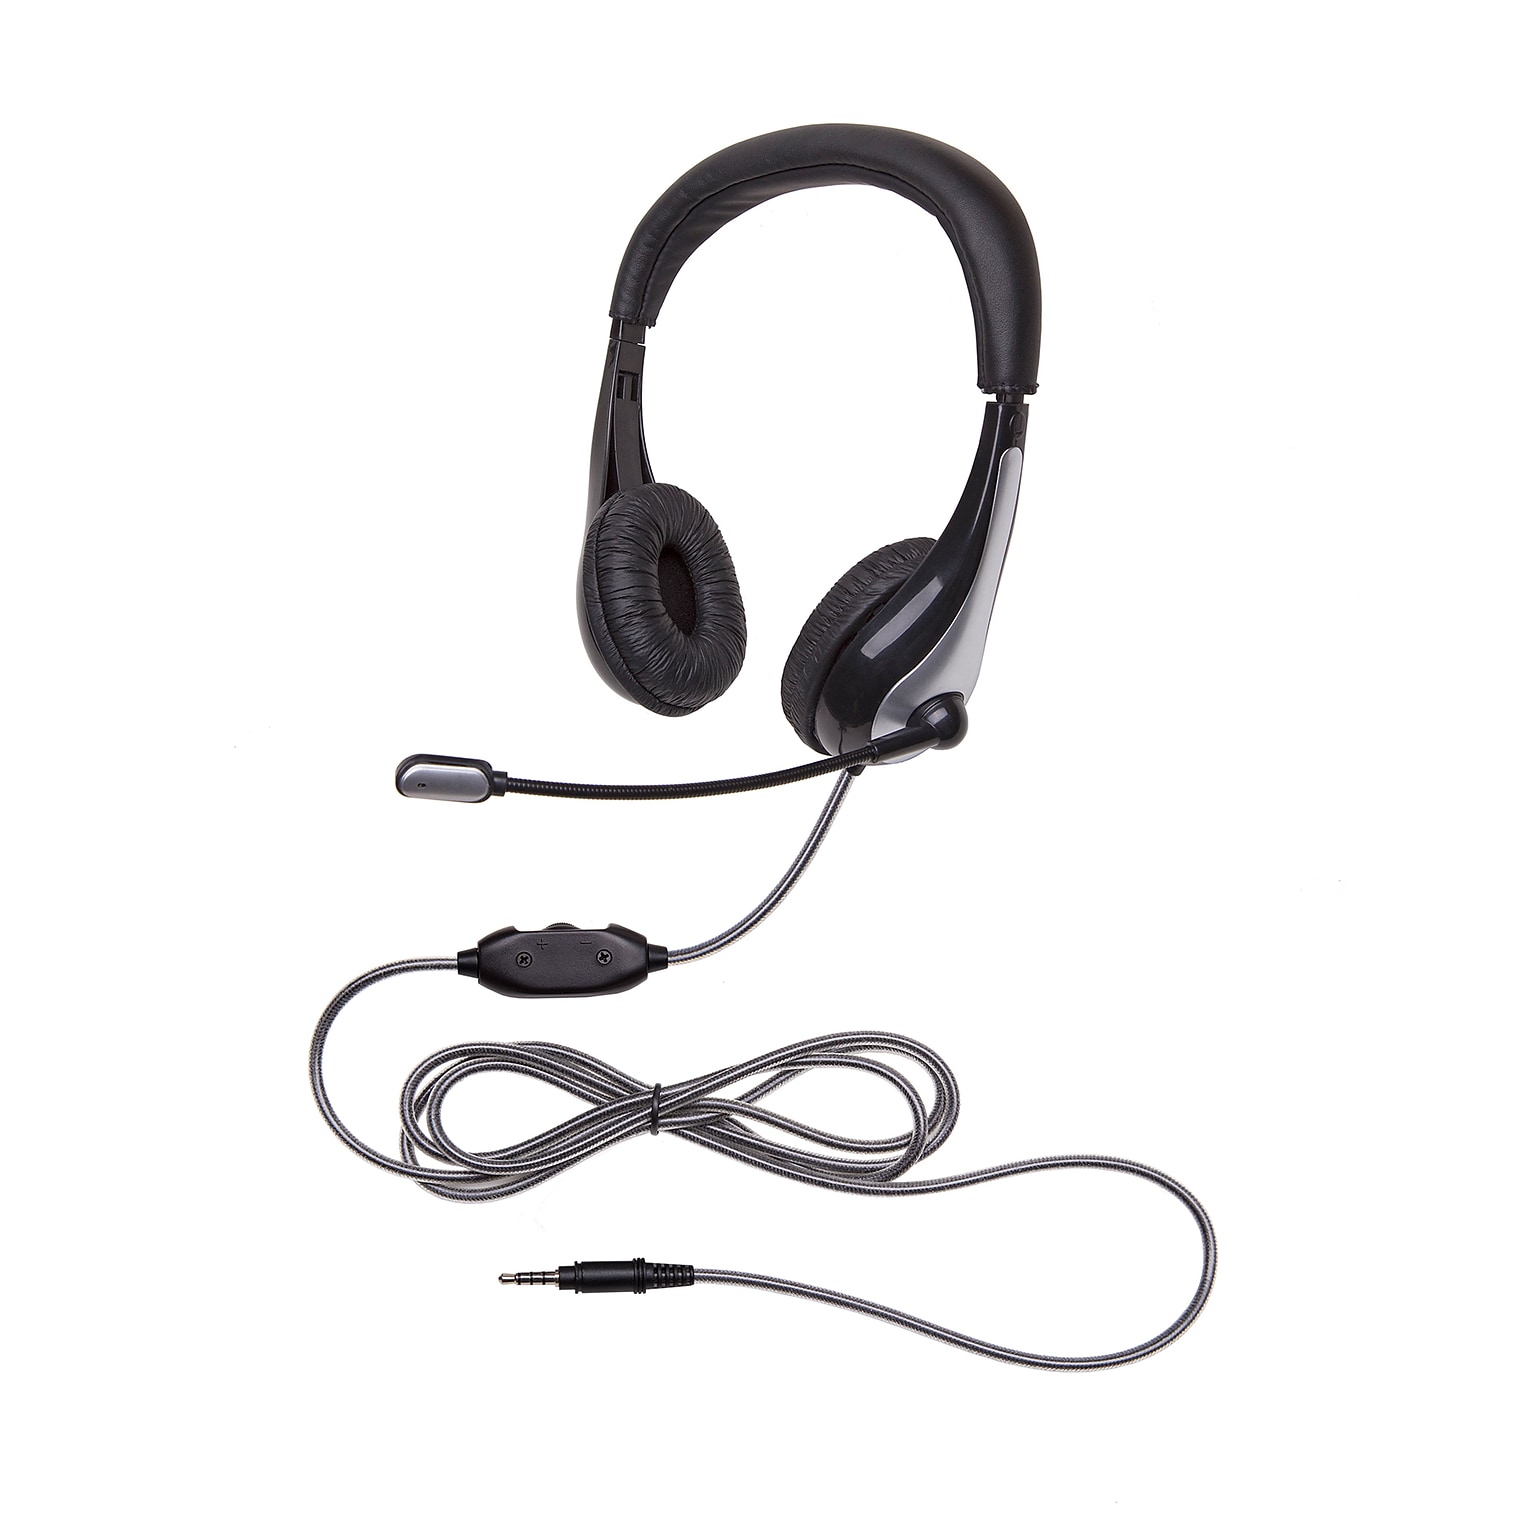 Califone NeoTech 1025MT Mid-Weight, On-Ear Stereo Headset with Gooseneck Microphone, 3.5mm Plug, Black (CAF1025MT)